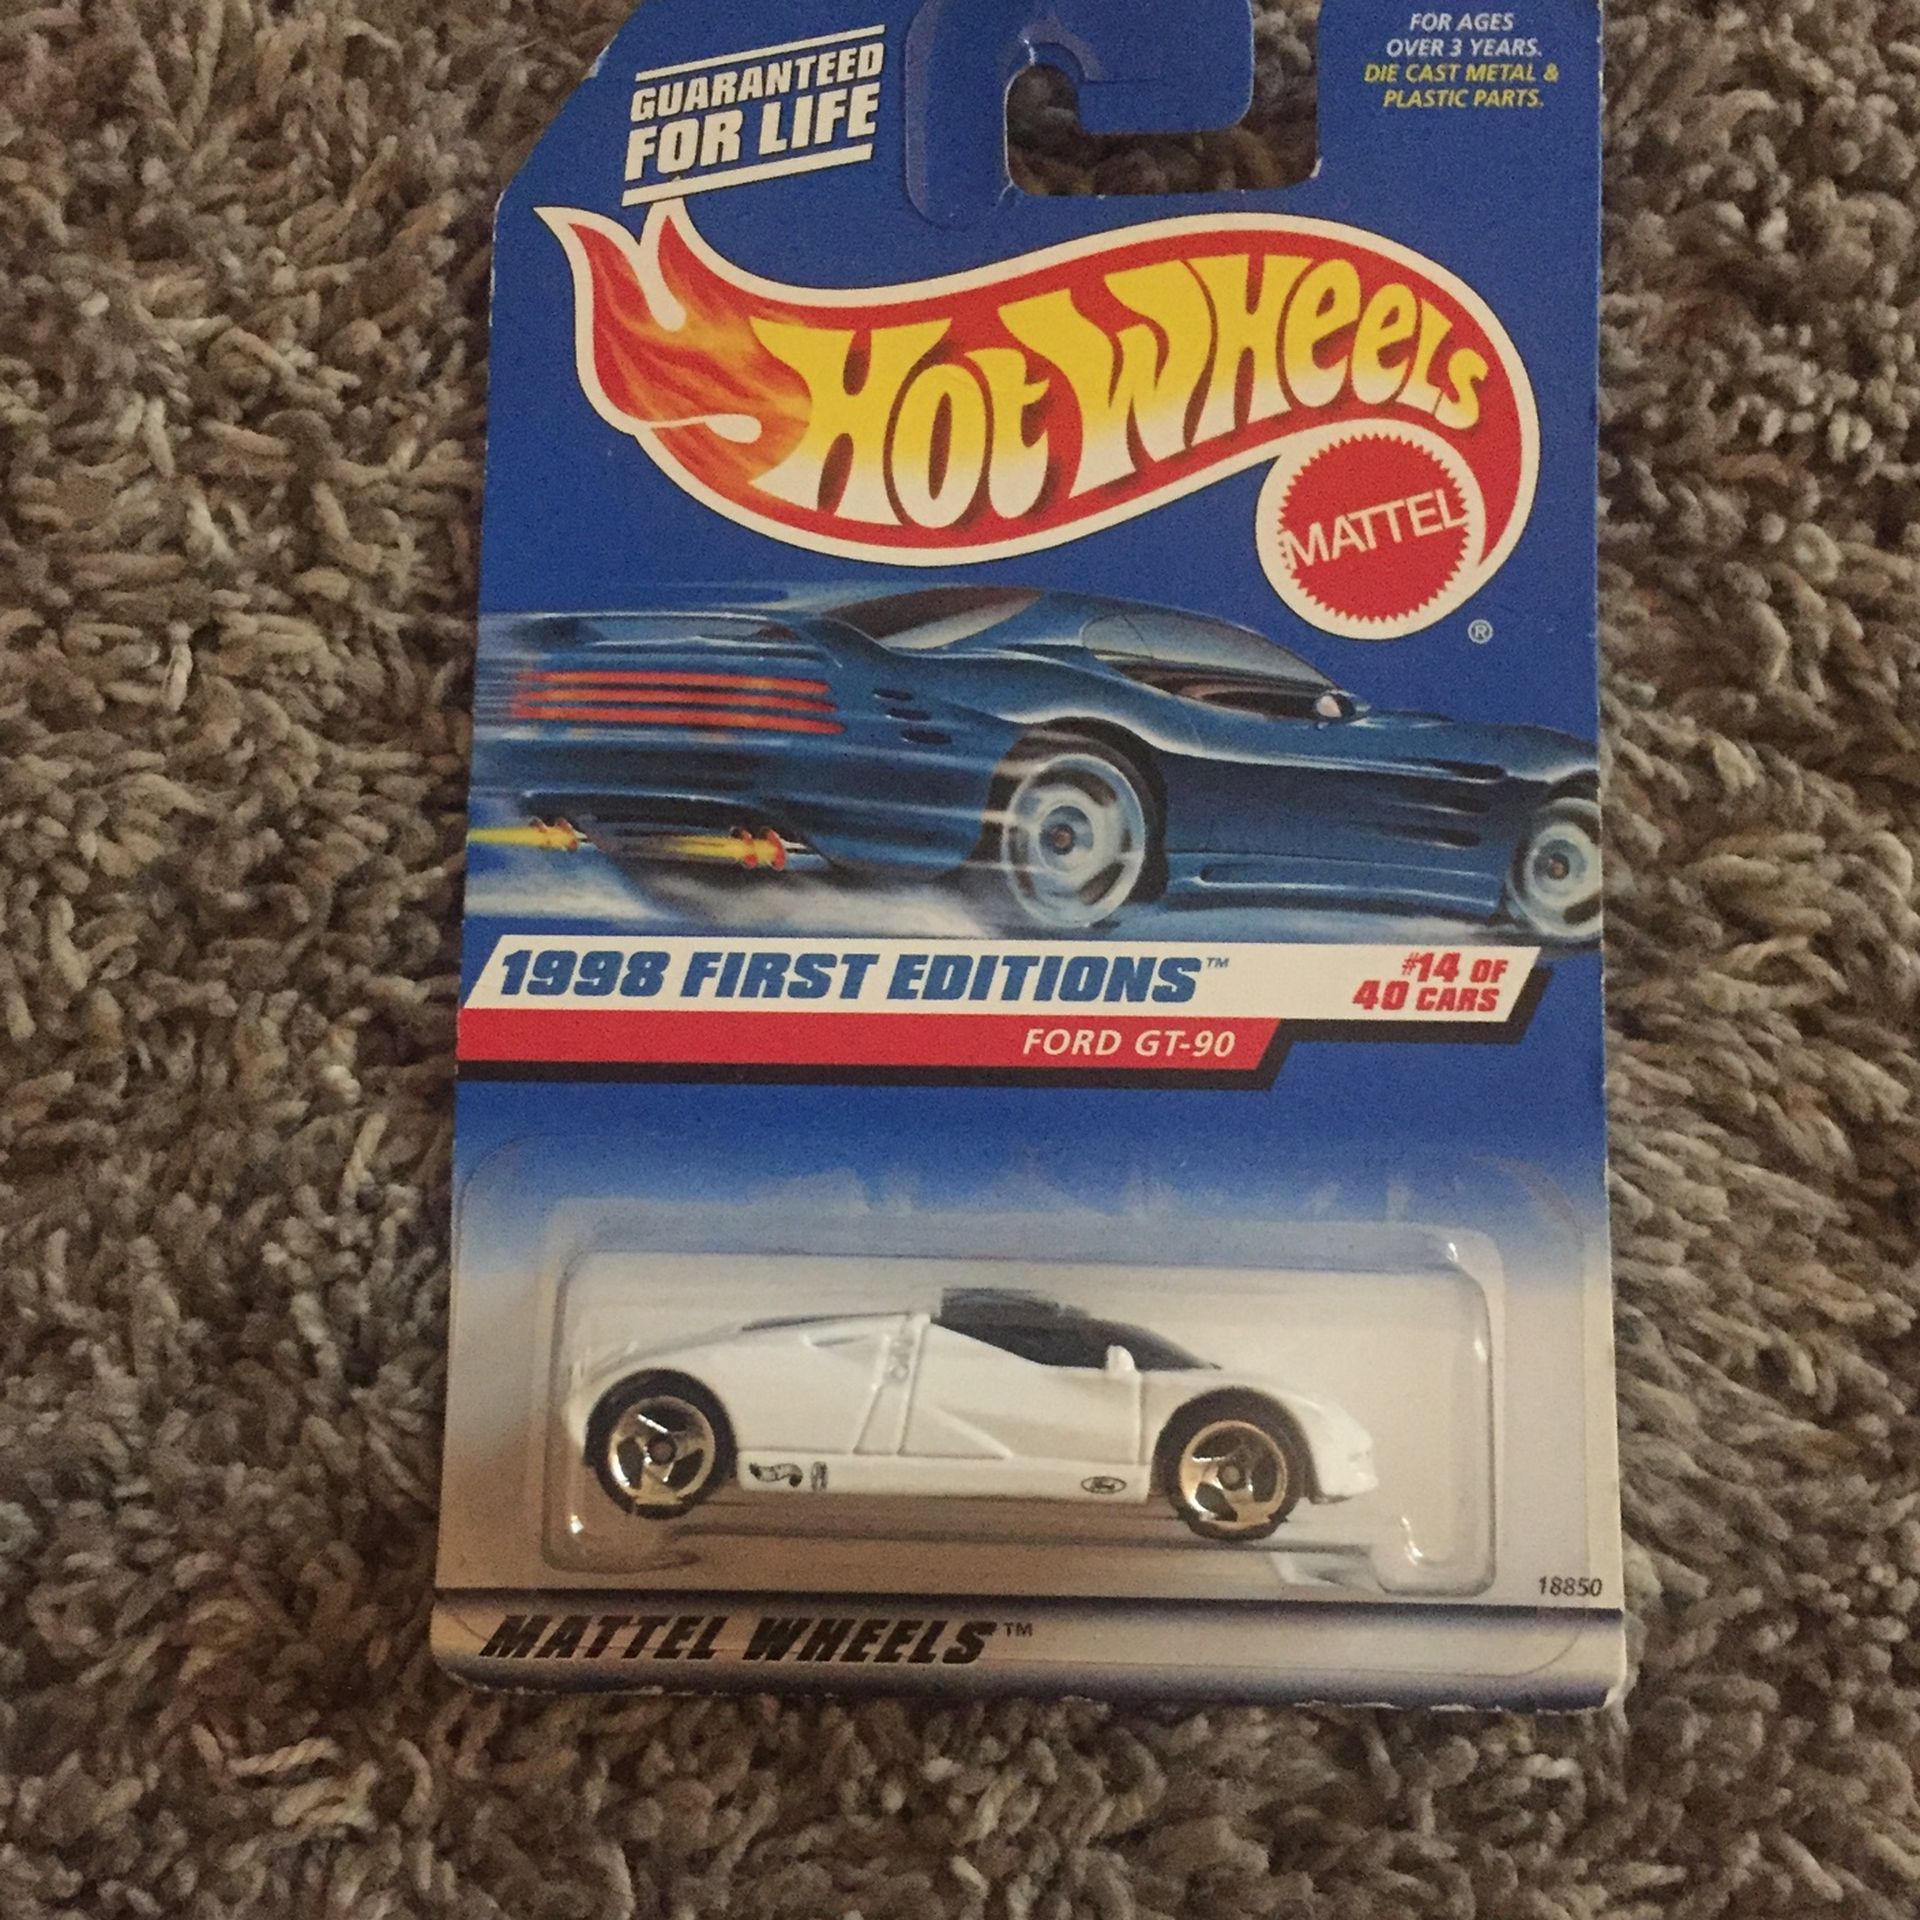 Ford GT-90 1988 Hot Wheel Unopened.